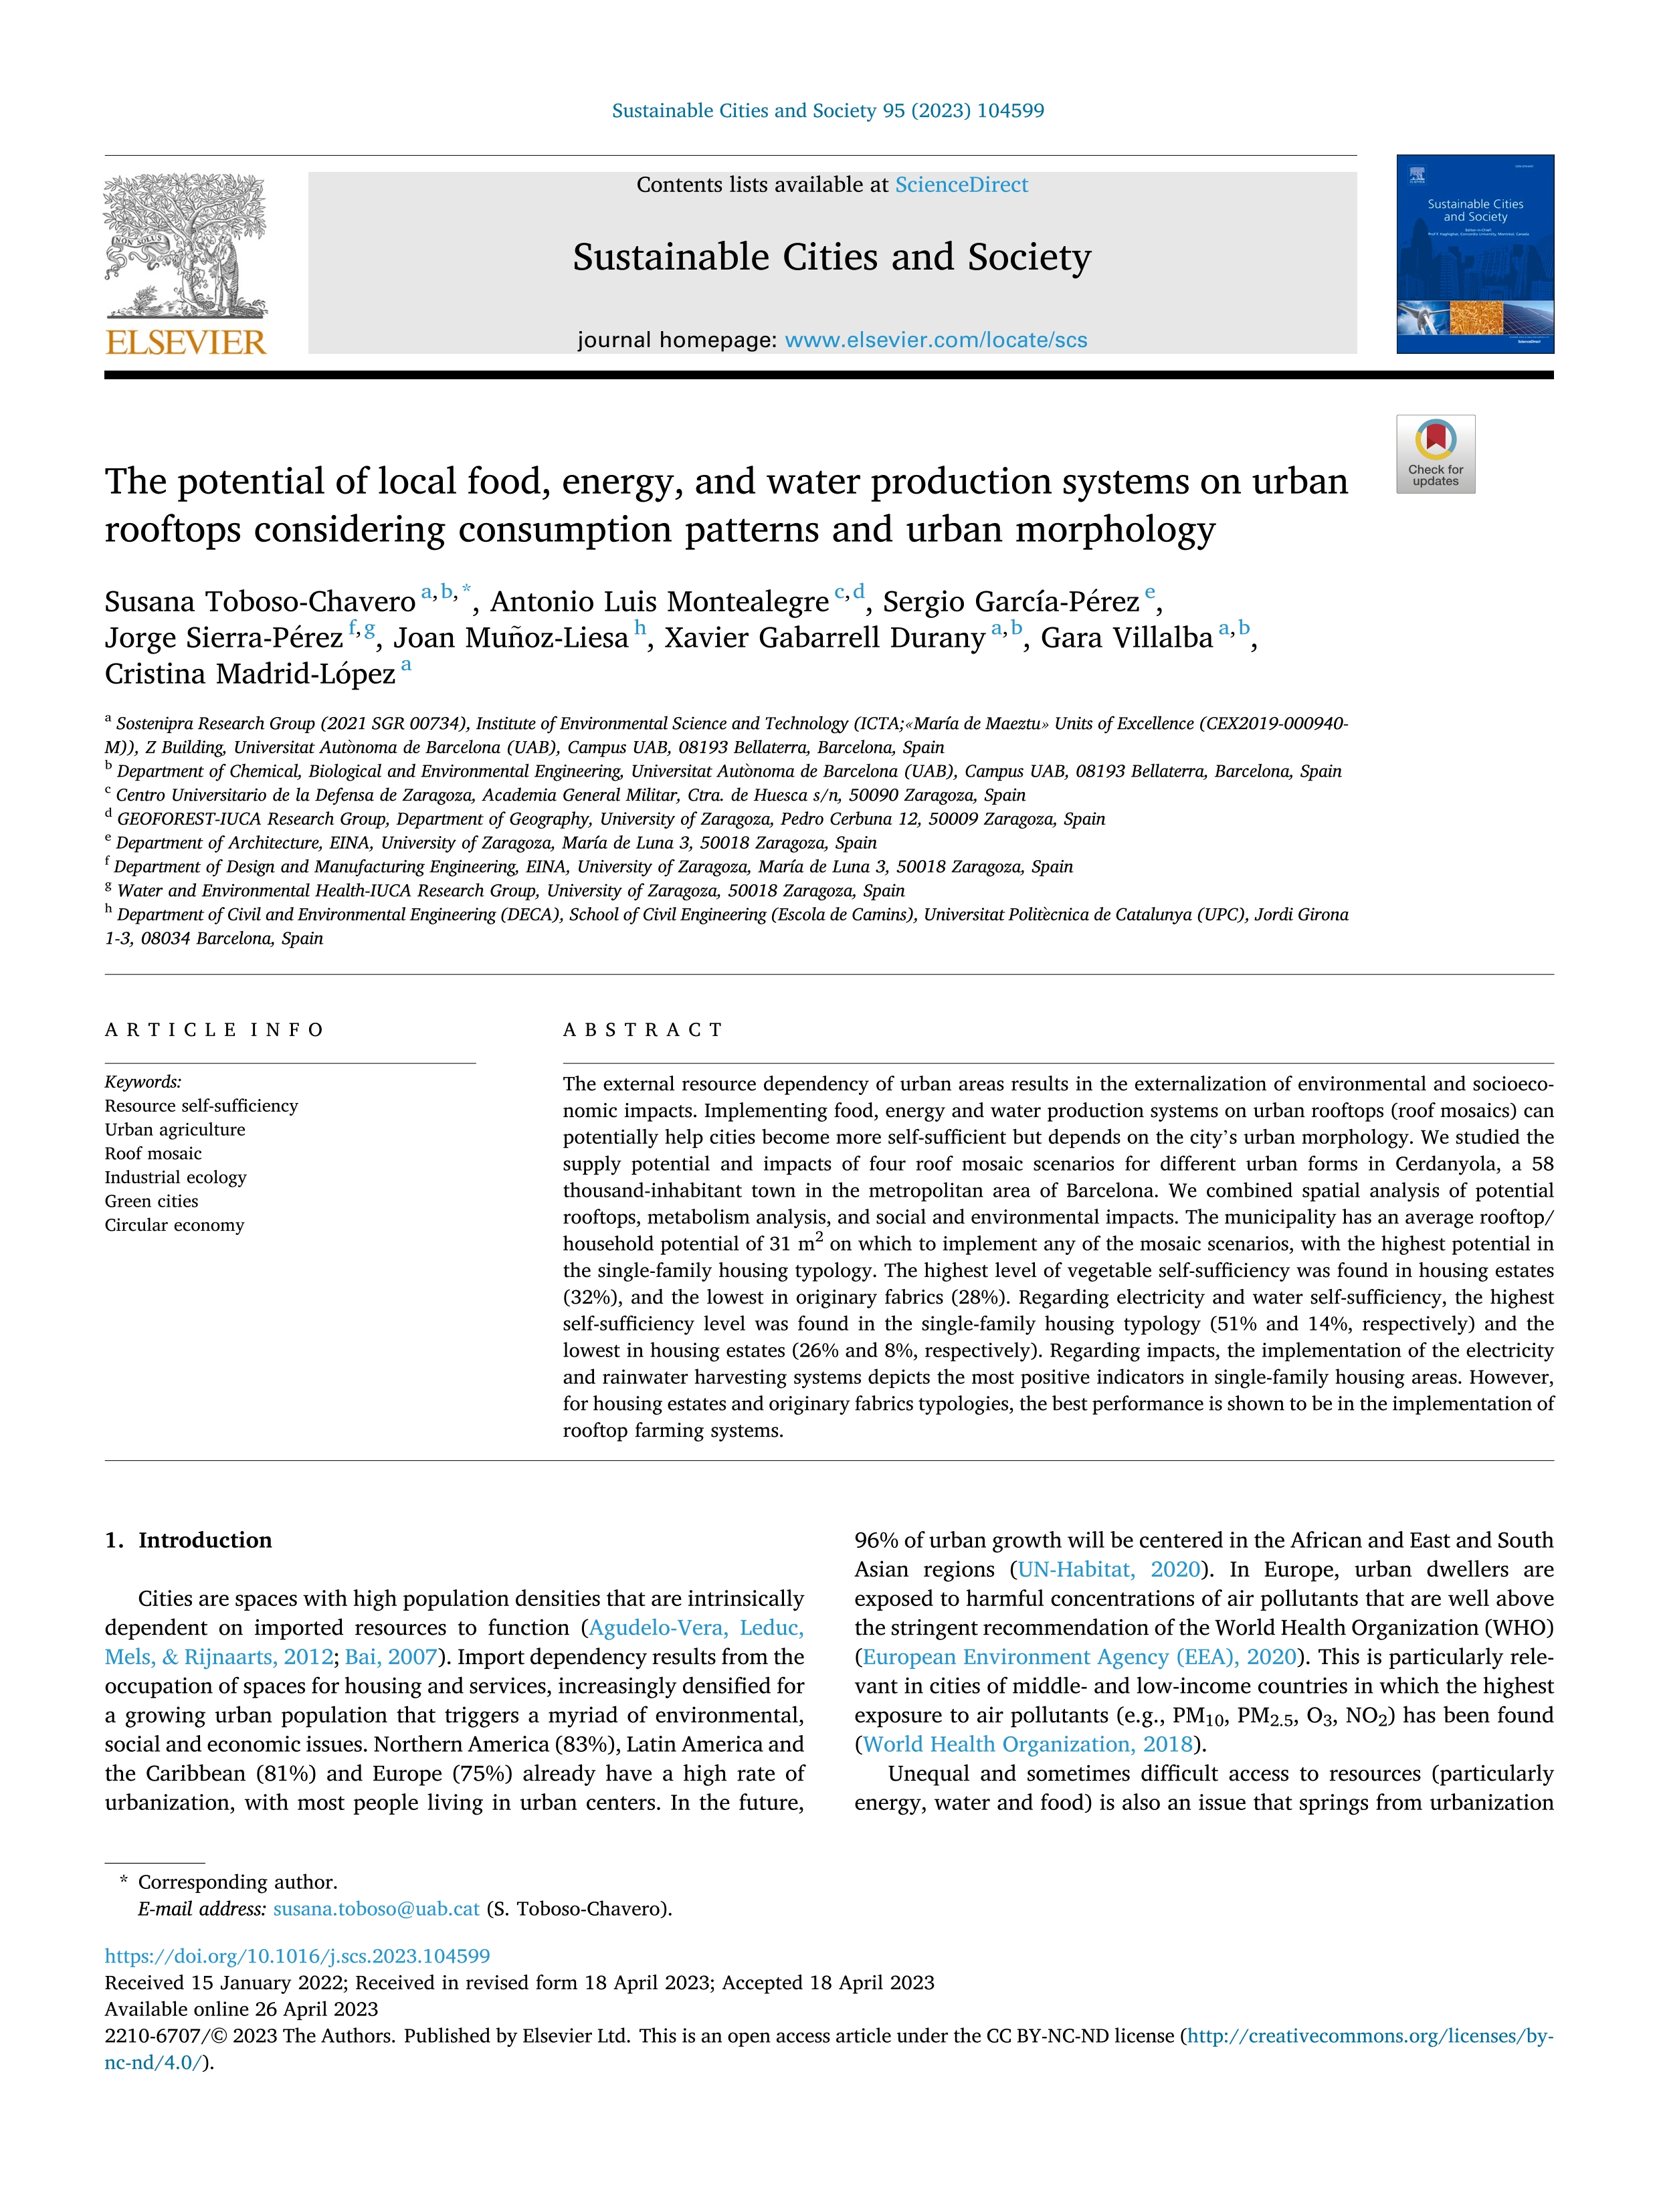 The potential of local food, energy, and water production systems on urban rooftops considering consumption patterns and urban morphology